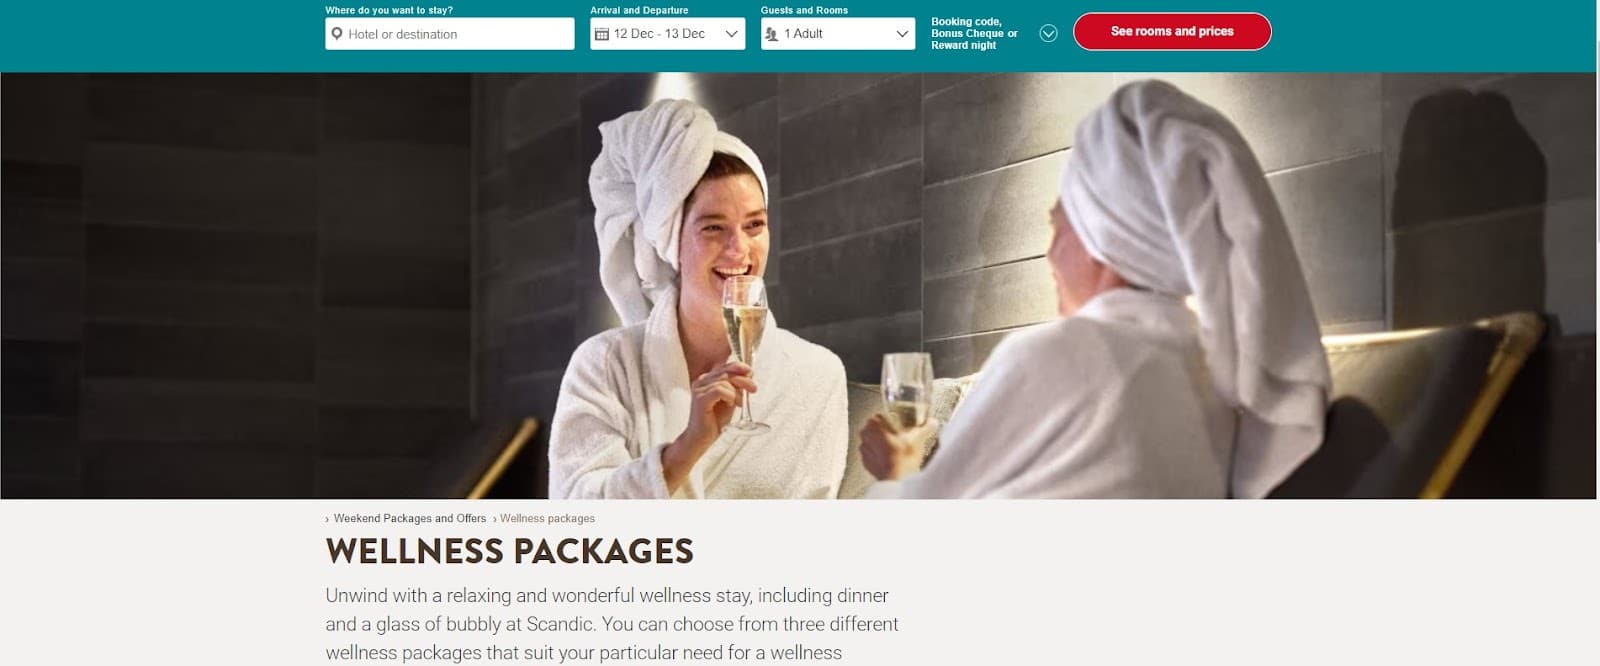 Health and wellness packages